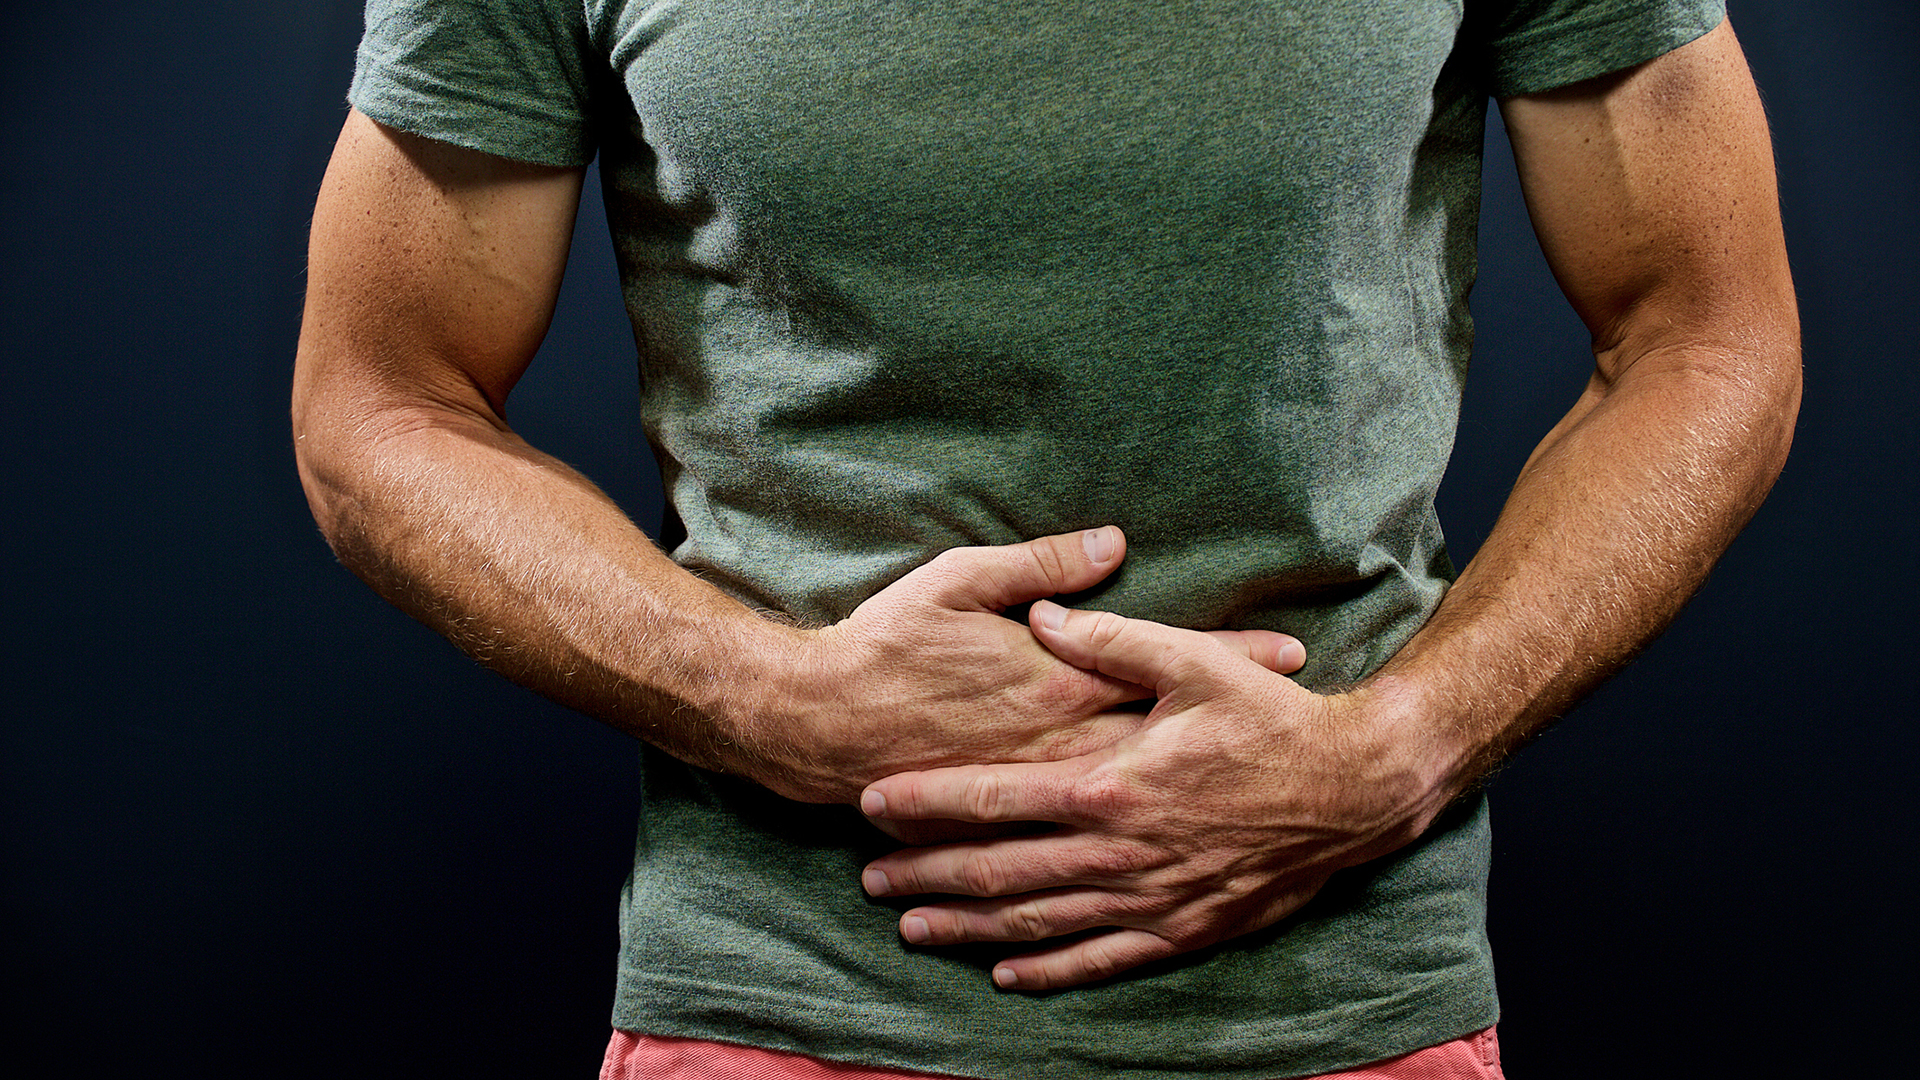 Life-changing therapy for short bowel syndrome recommended by NICE